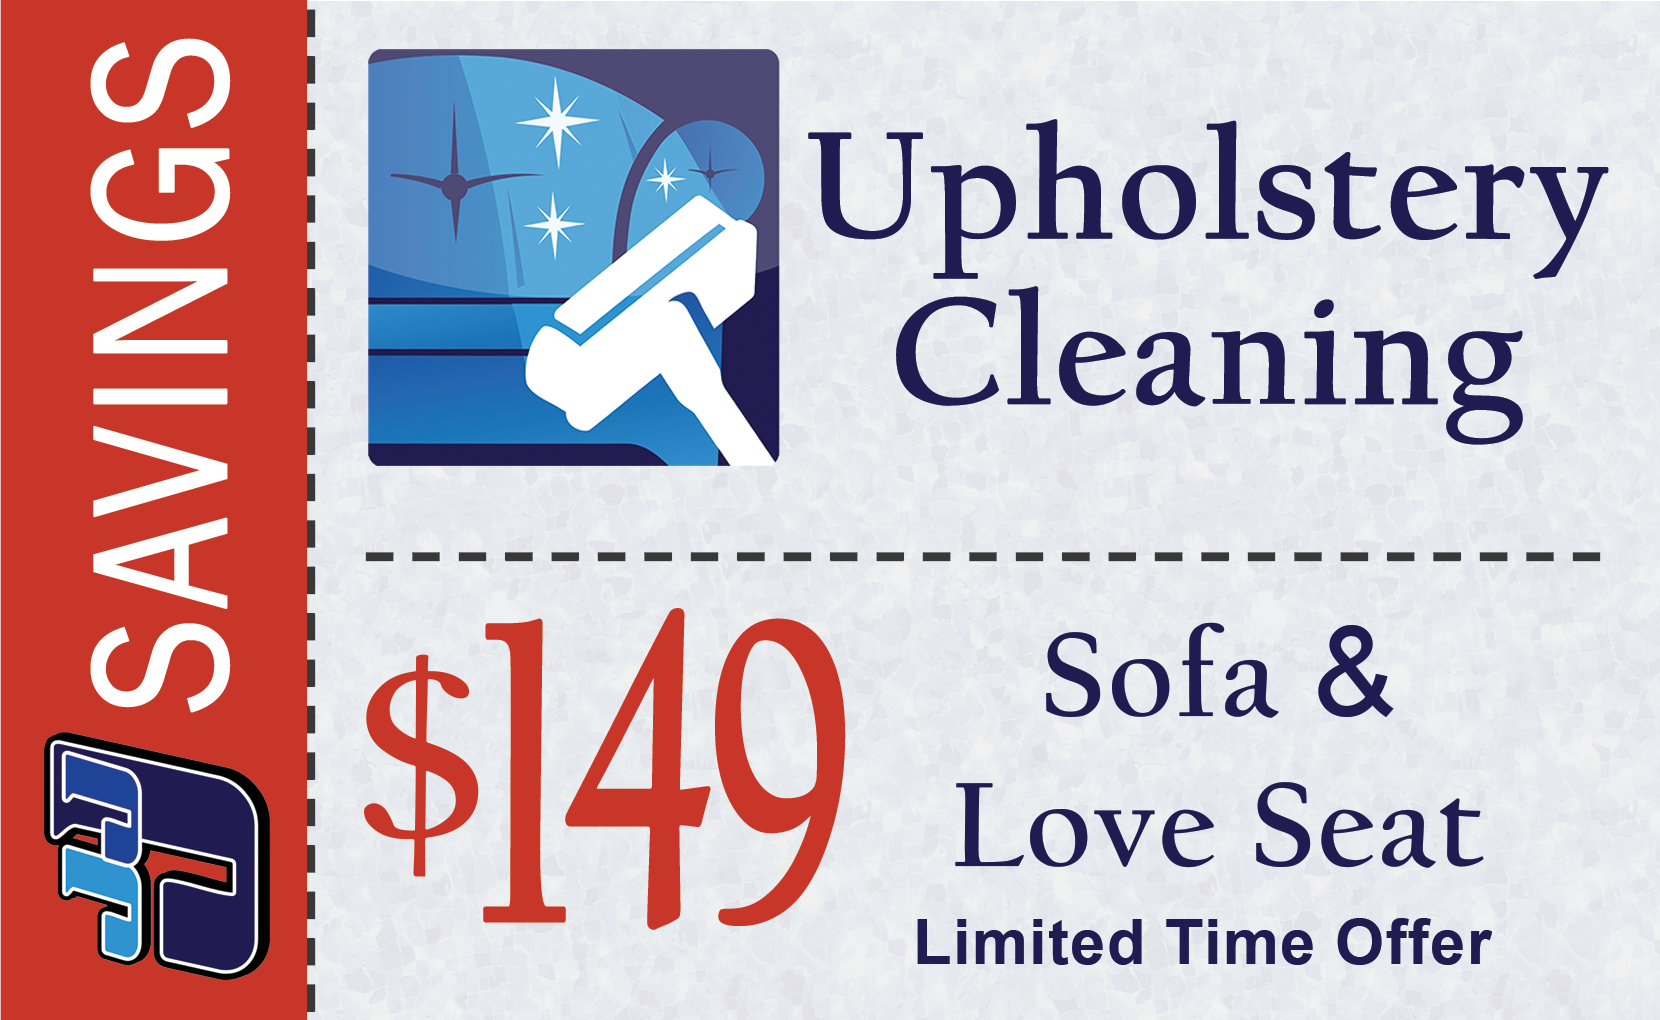 upholstery cleaning coupon Las Vegas - sofa cleaning